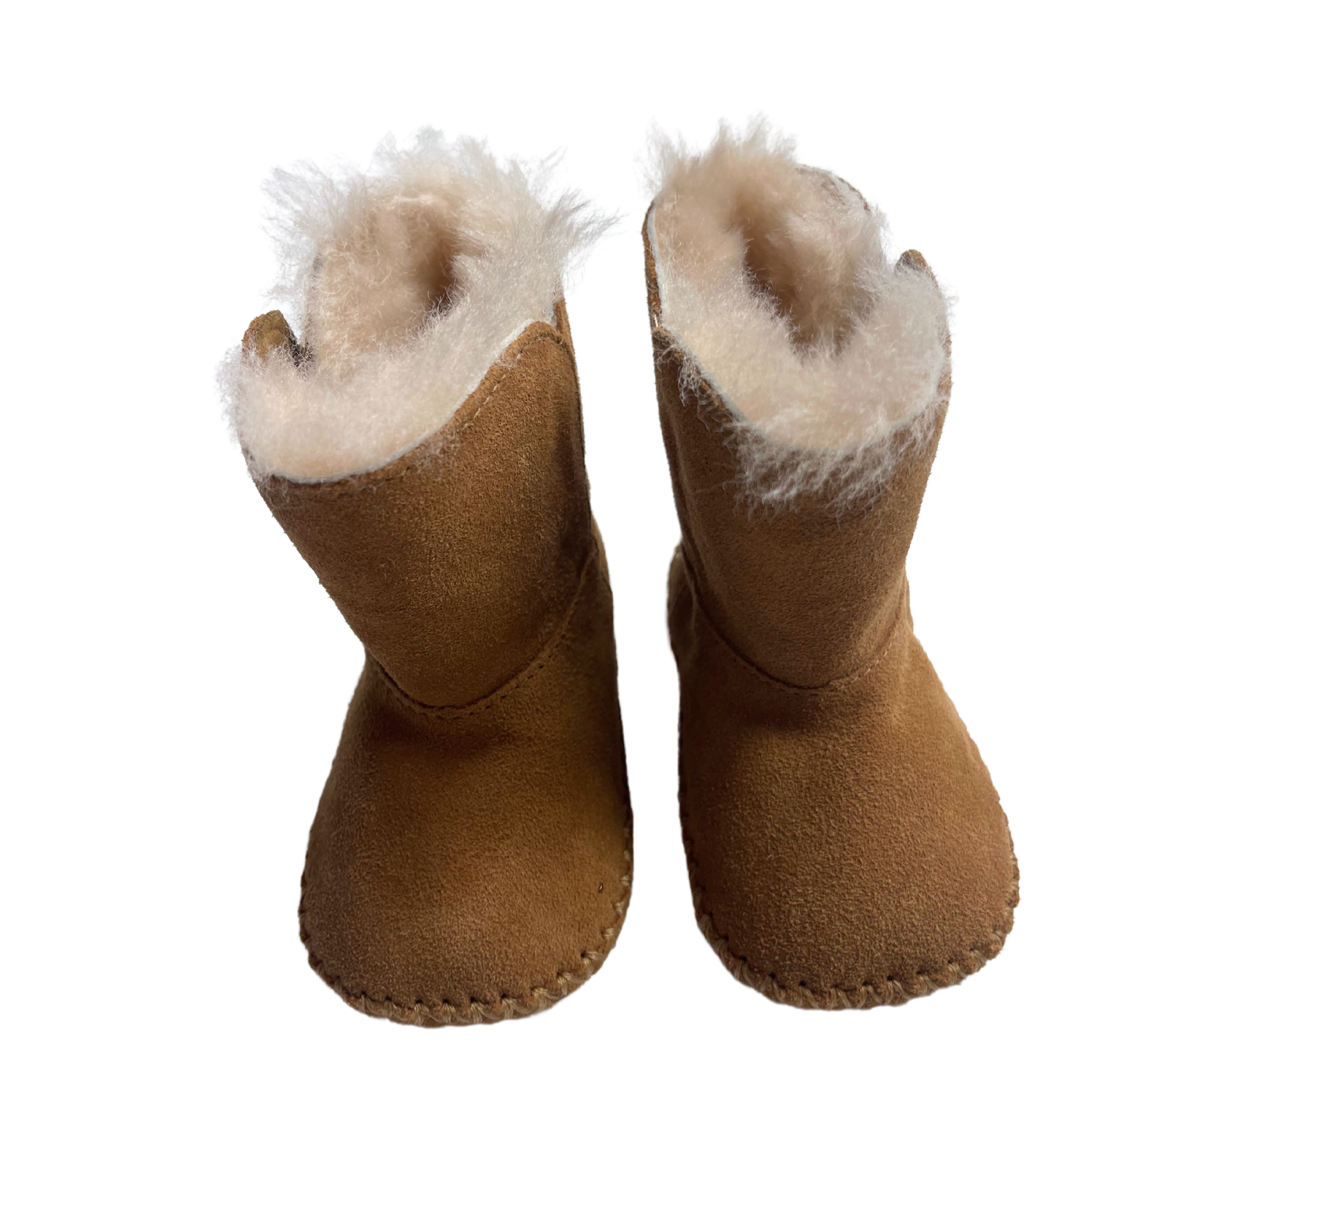 UGG - Chaussons montants - 18